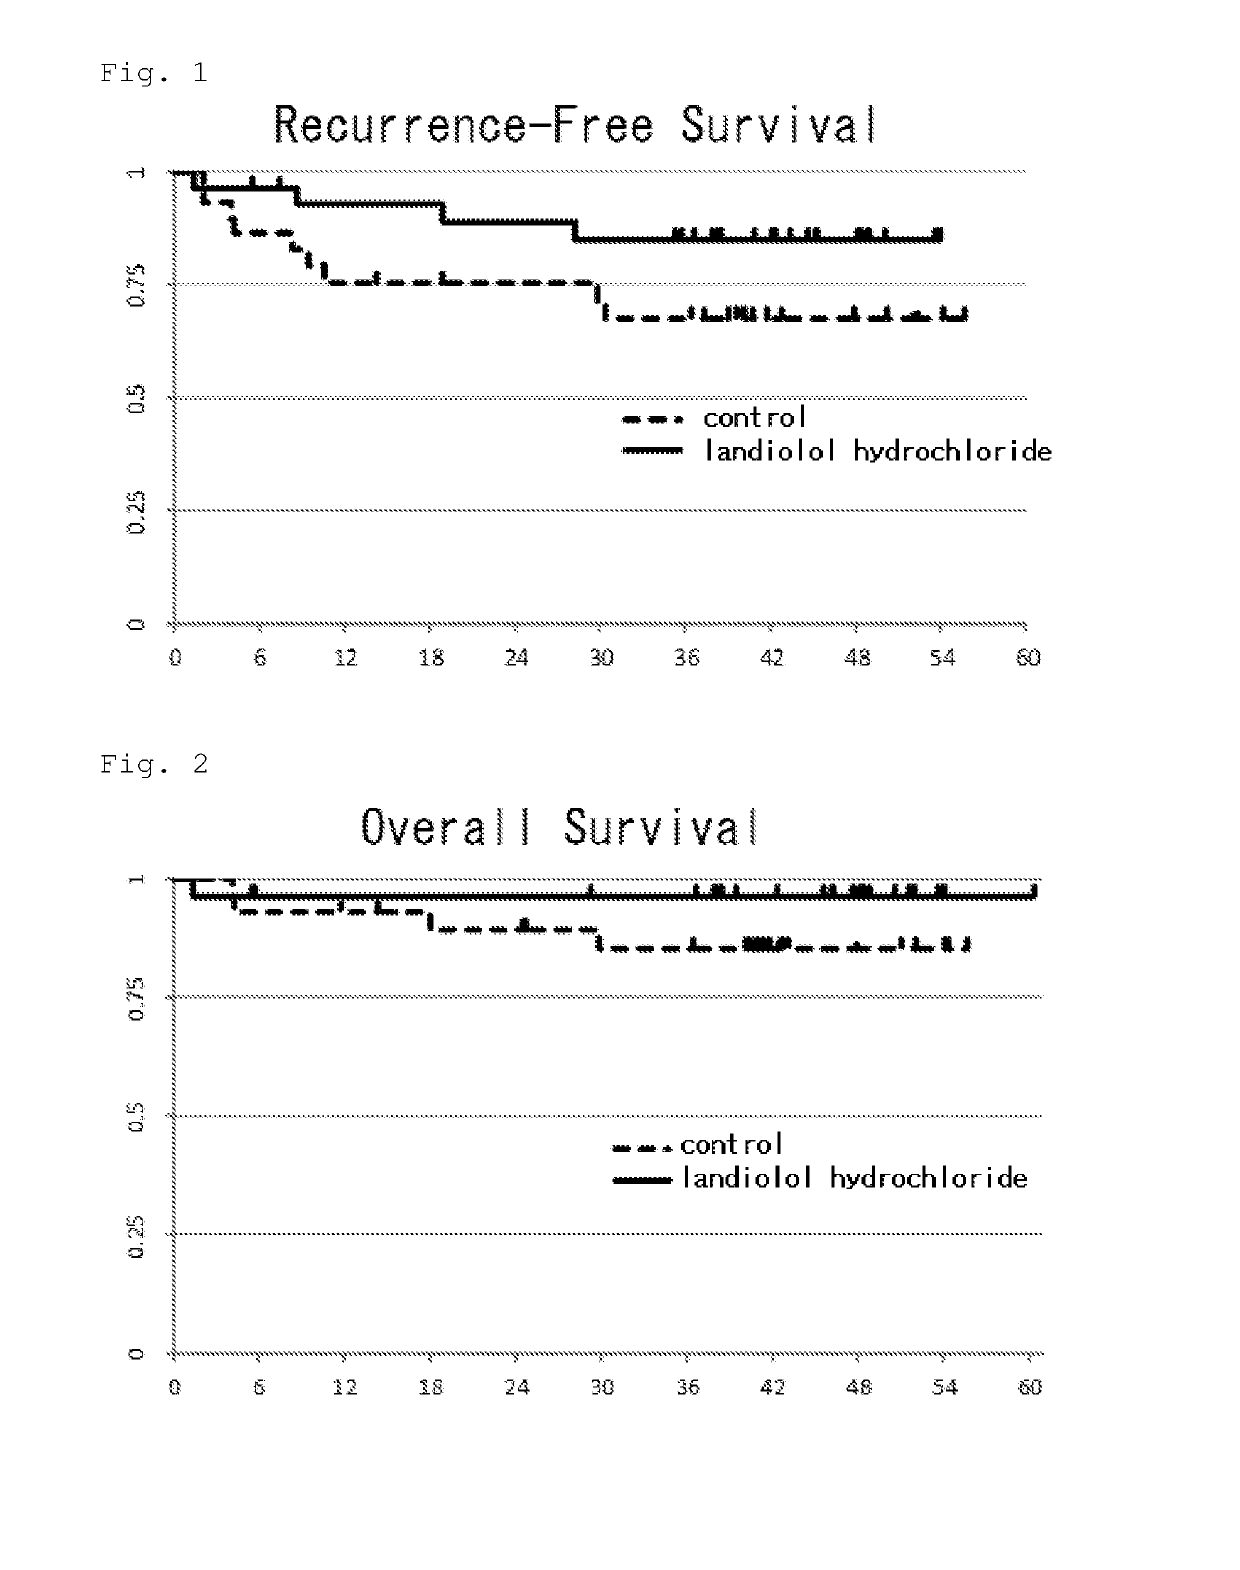 Agent for suppressing post-surgical cancer recurrence and/or metastasis